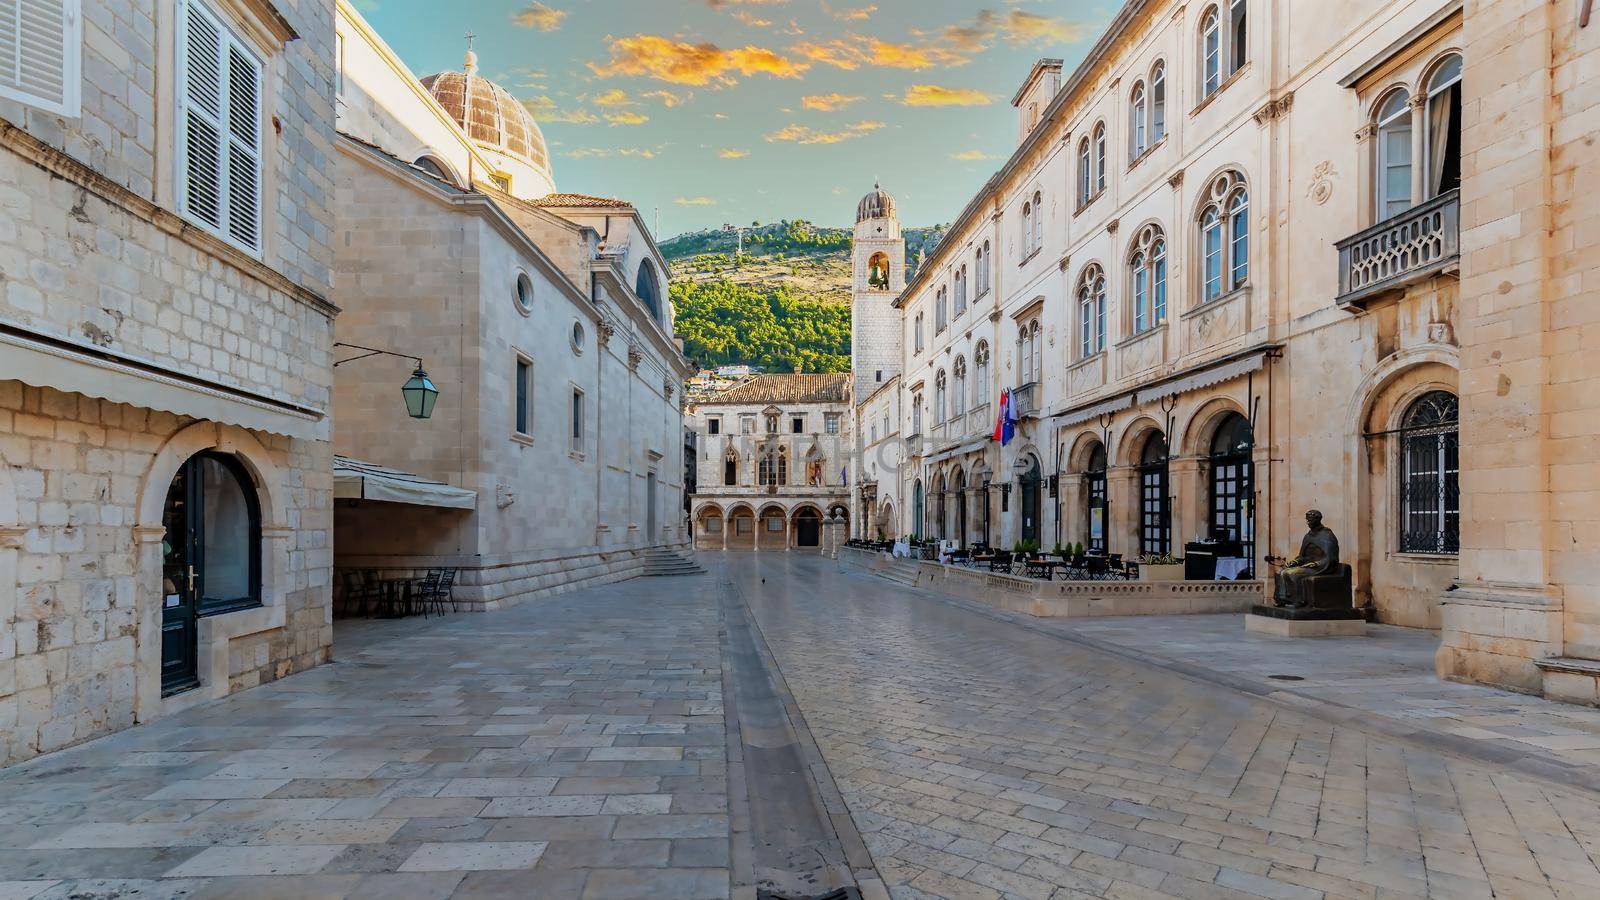 One of the main streets of the old town of Dubrovnik overlooking Mount Srd, Croatia. The street is empty because it is early morning and there are no tourists due to the pandemic.